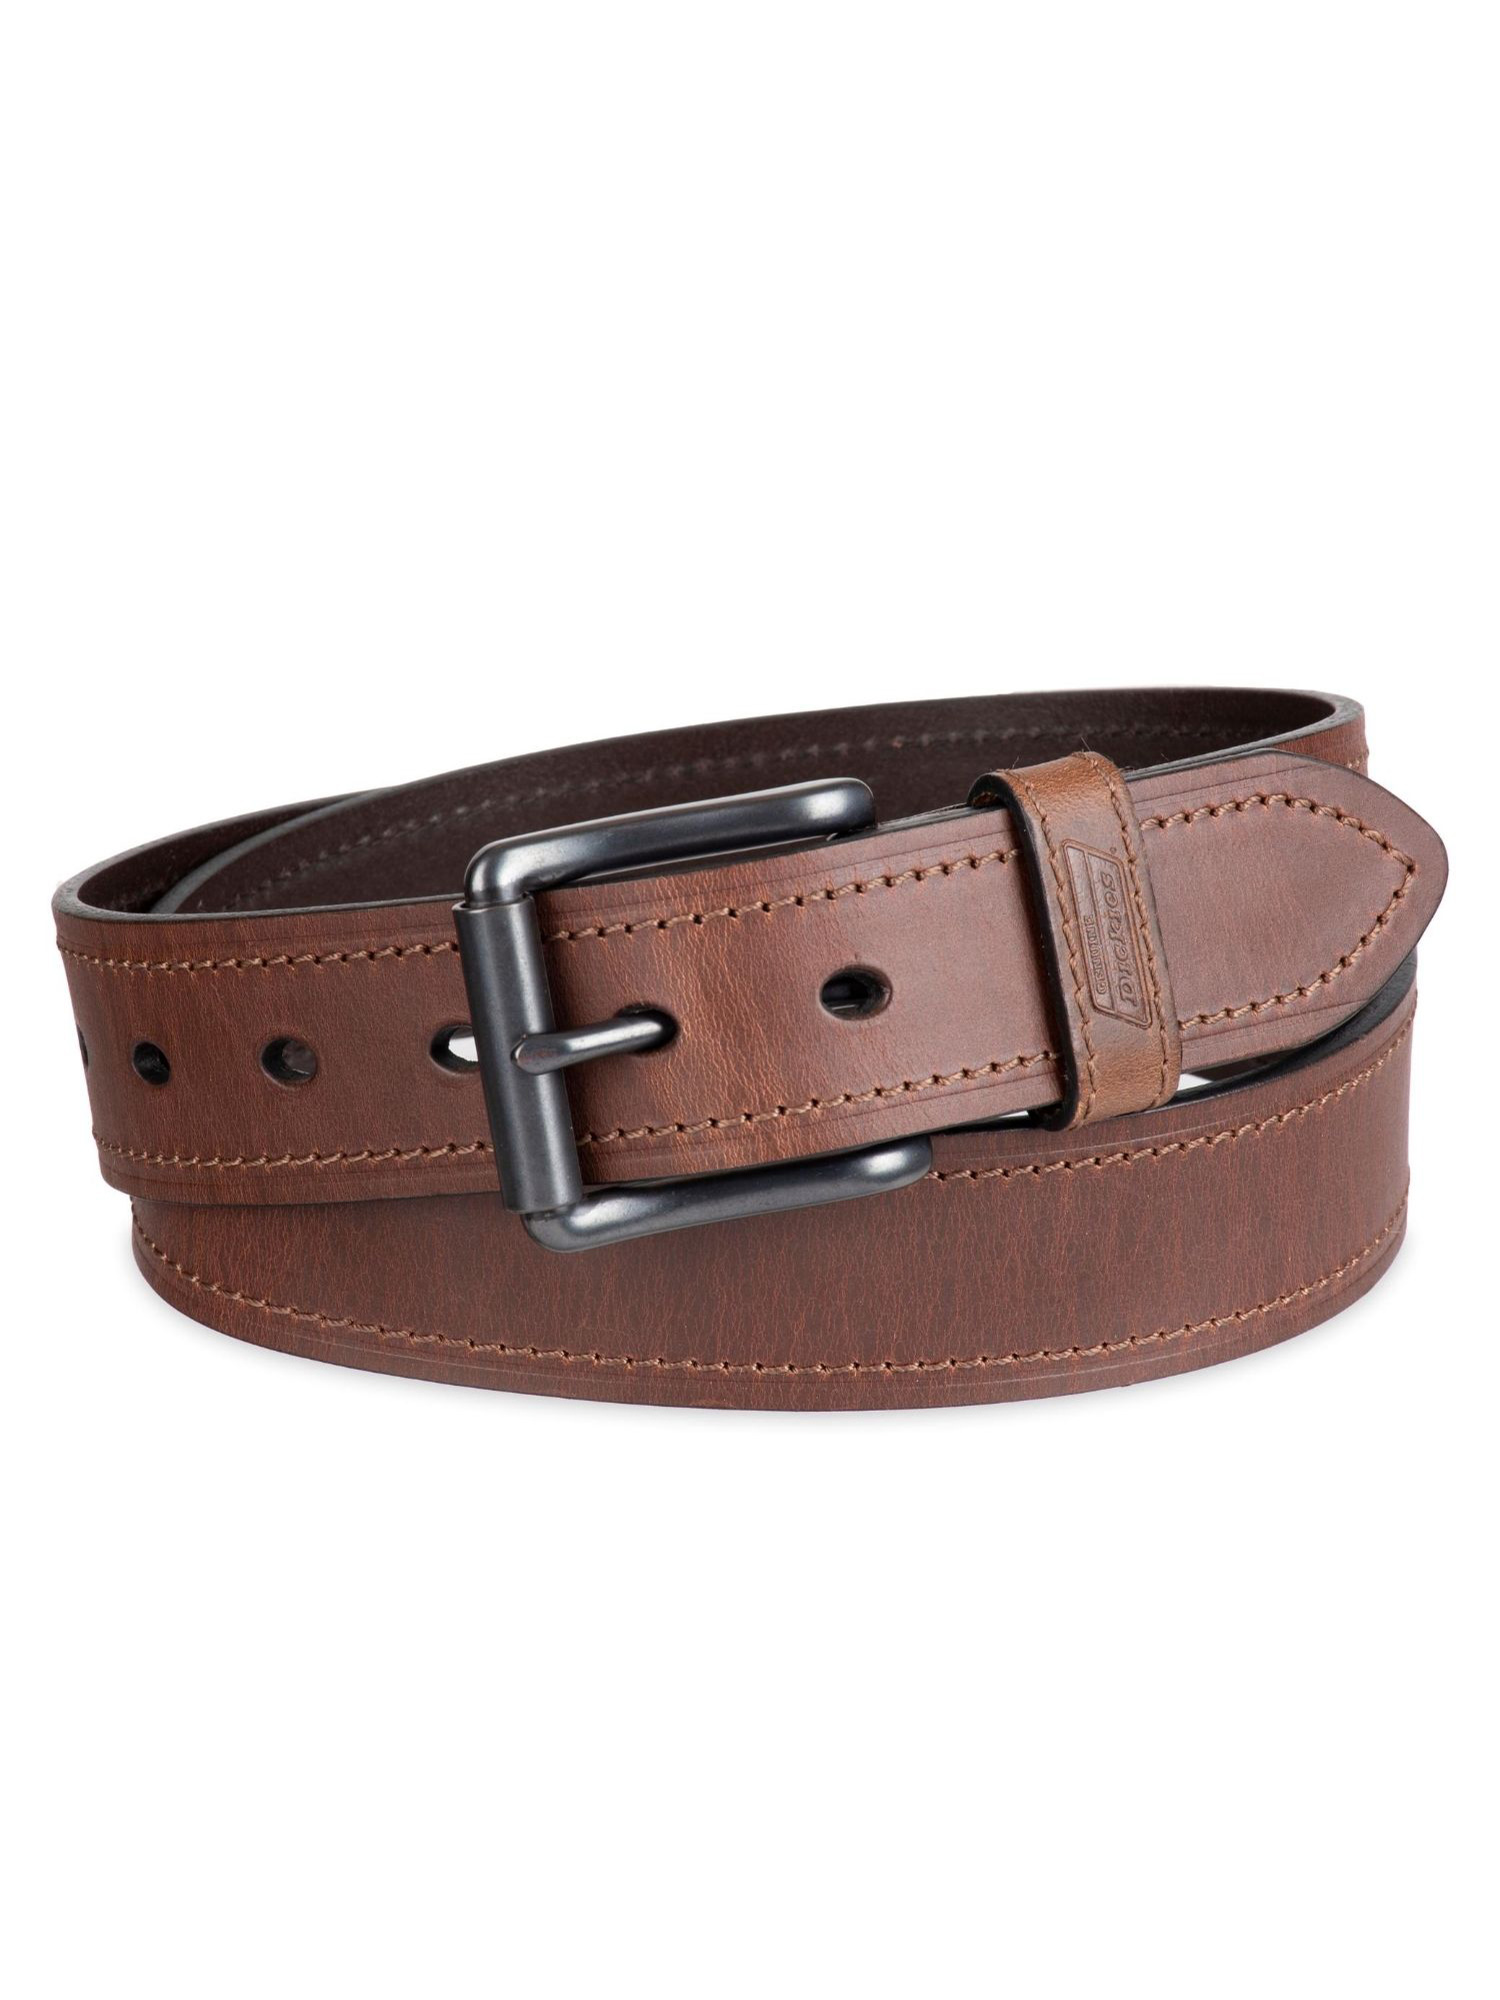 Genuine Dickies Men's Casual Brown Leather Work Belt with Roller Buckle (Regular and Big & Tall Sizes) - image 1 of 5